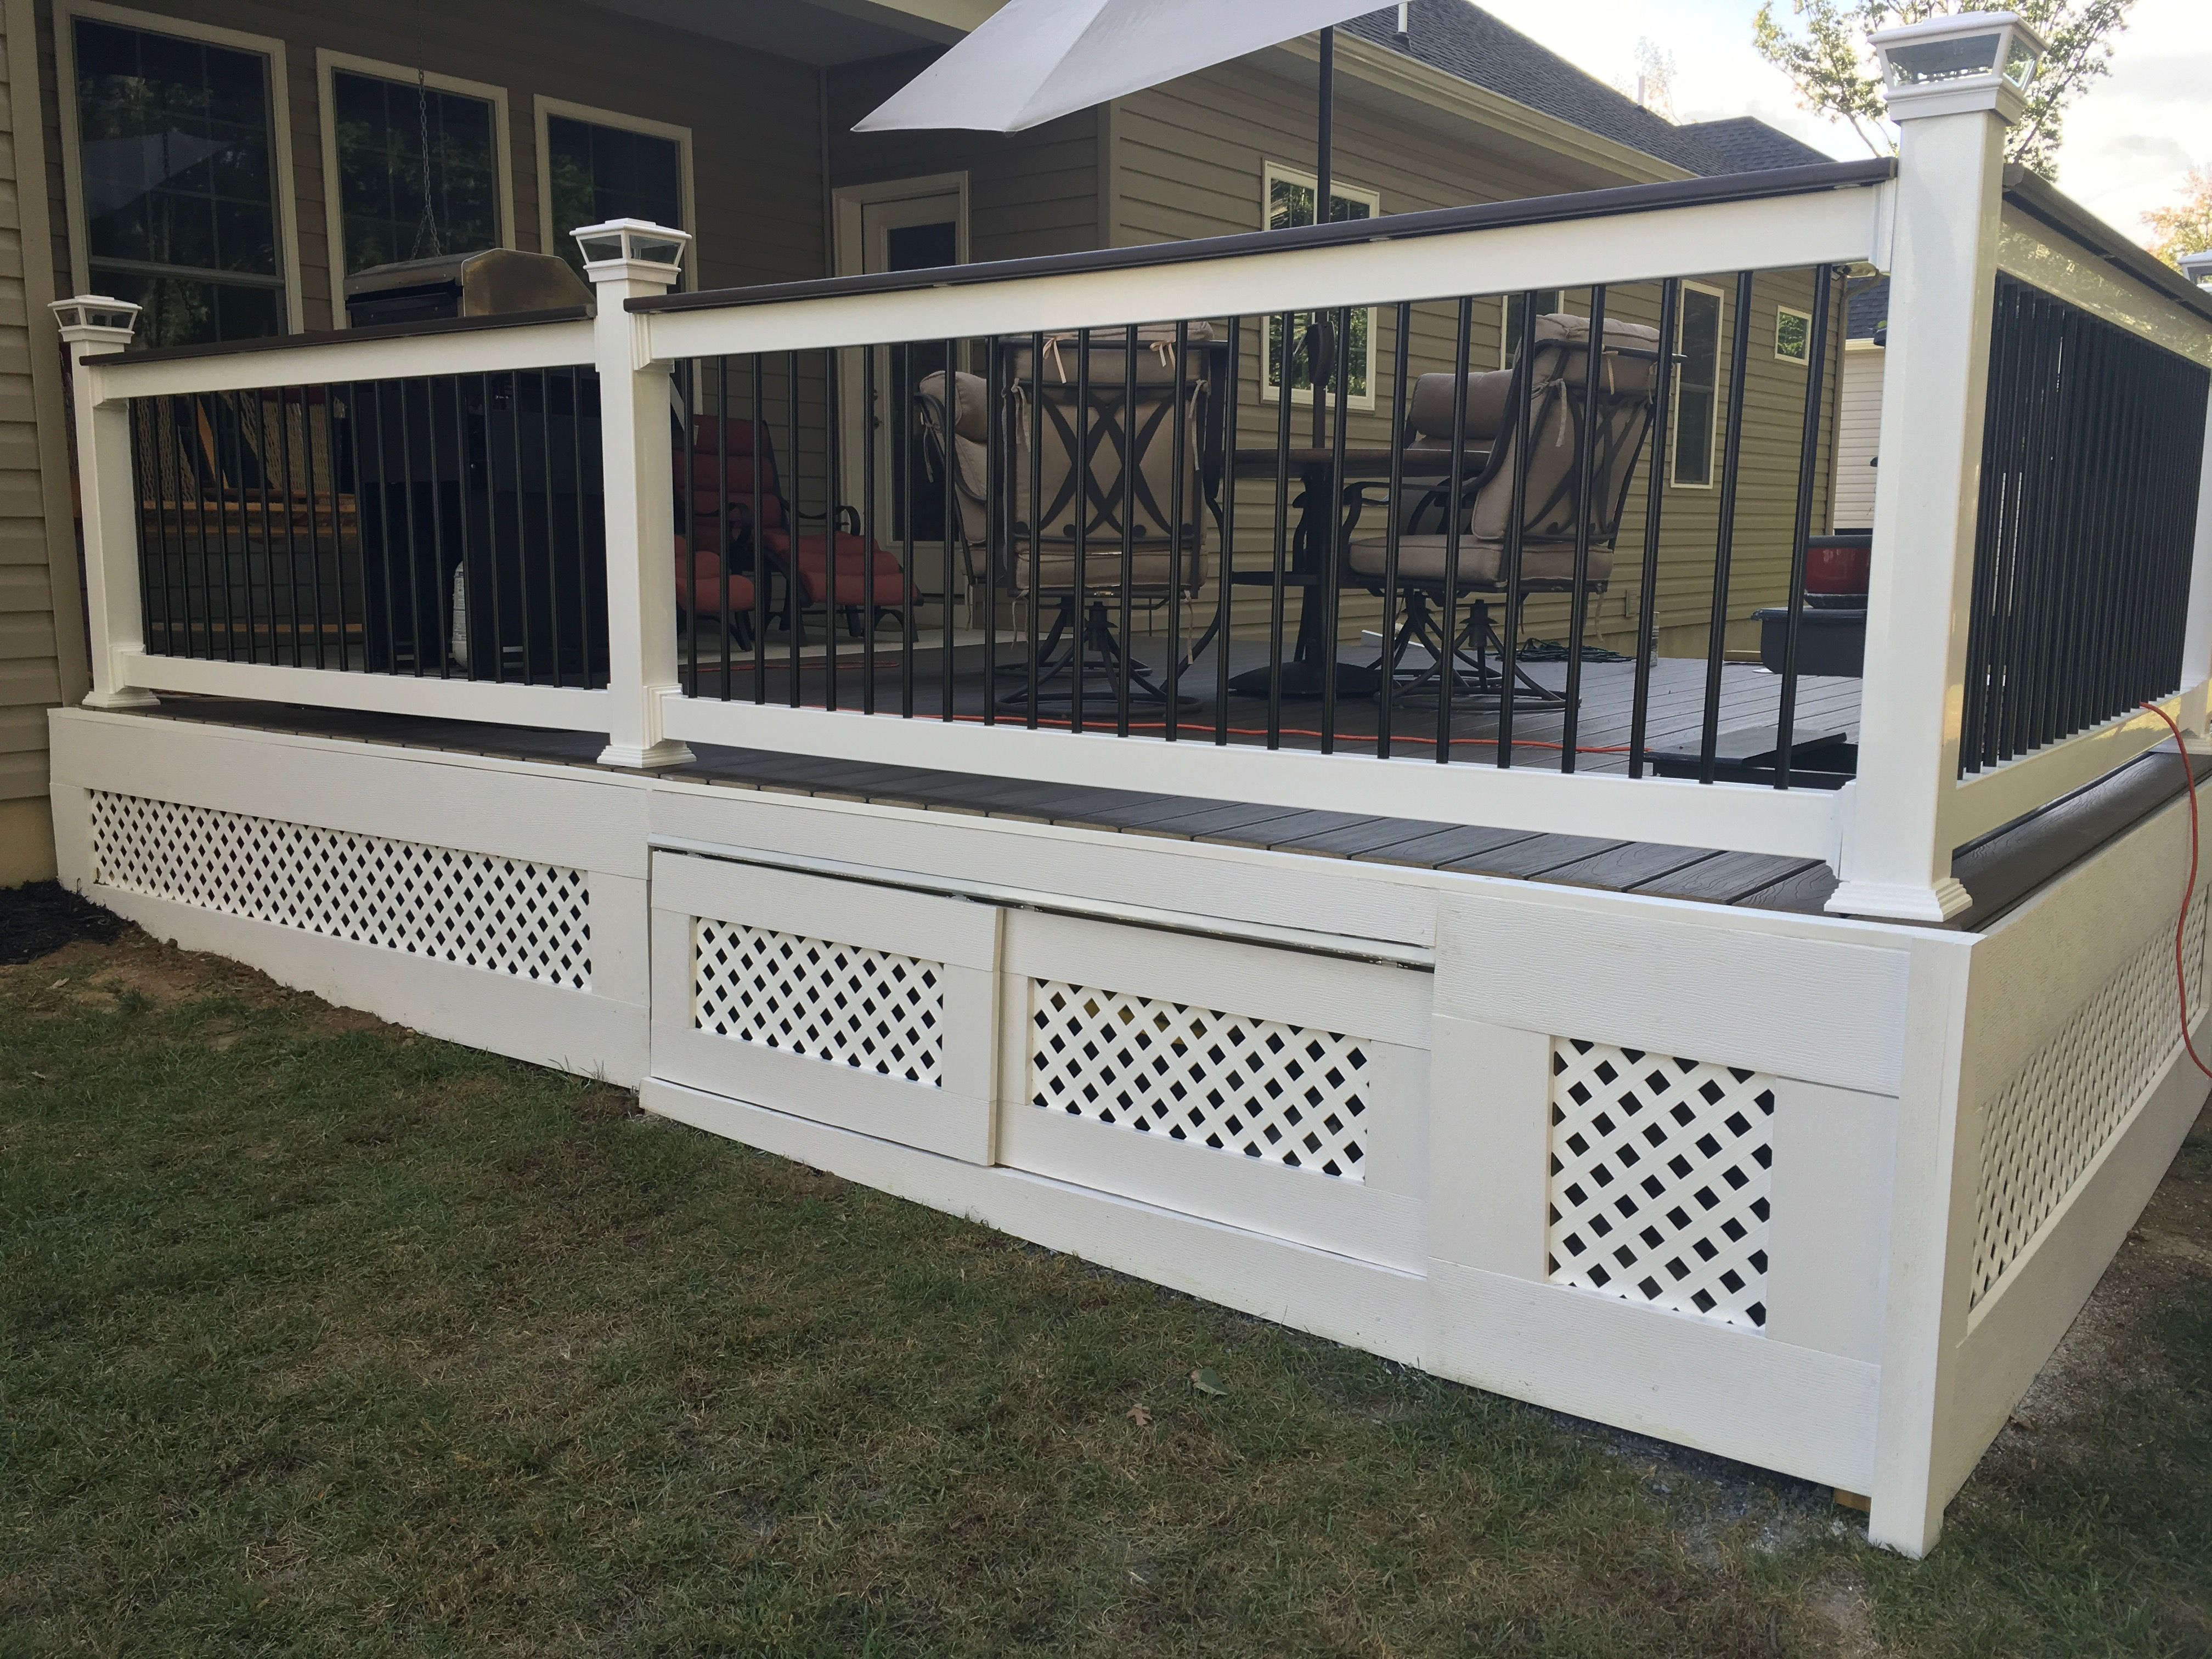 Deck Skirting Deck Skirting With Storage Deck Railings Trex Deck intended for size 4032 X 3024